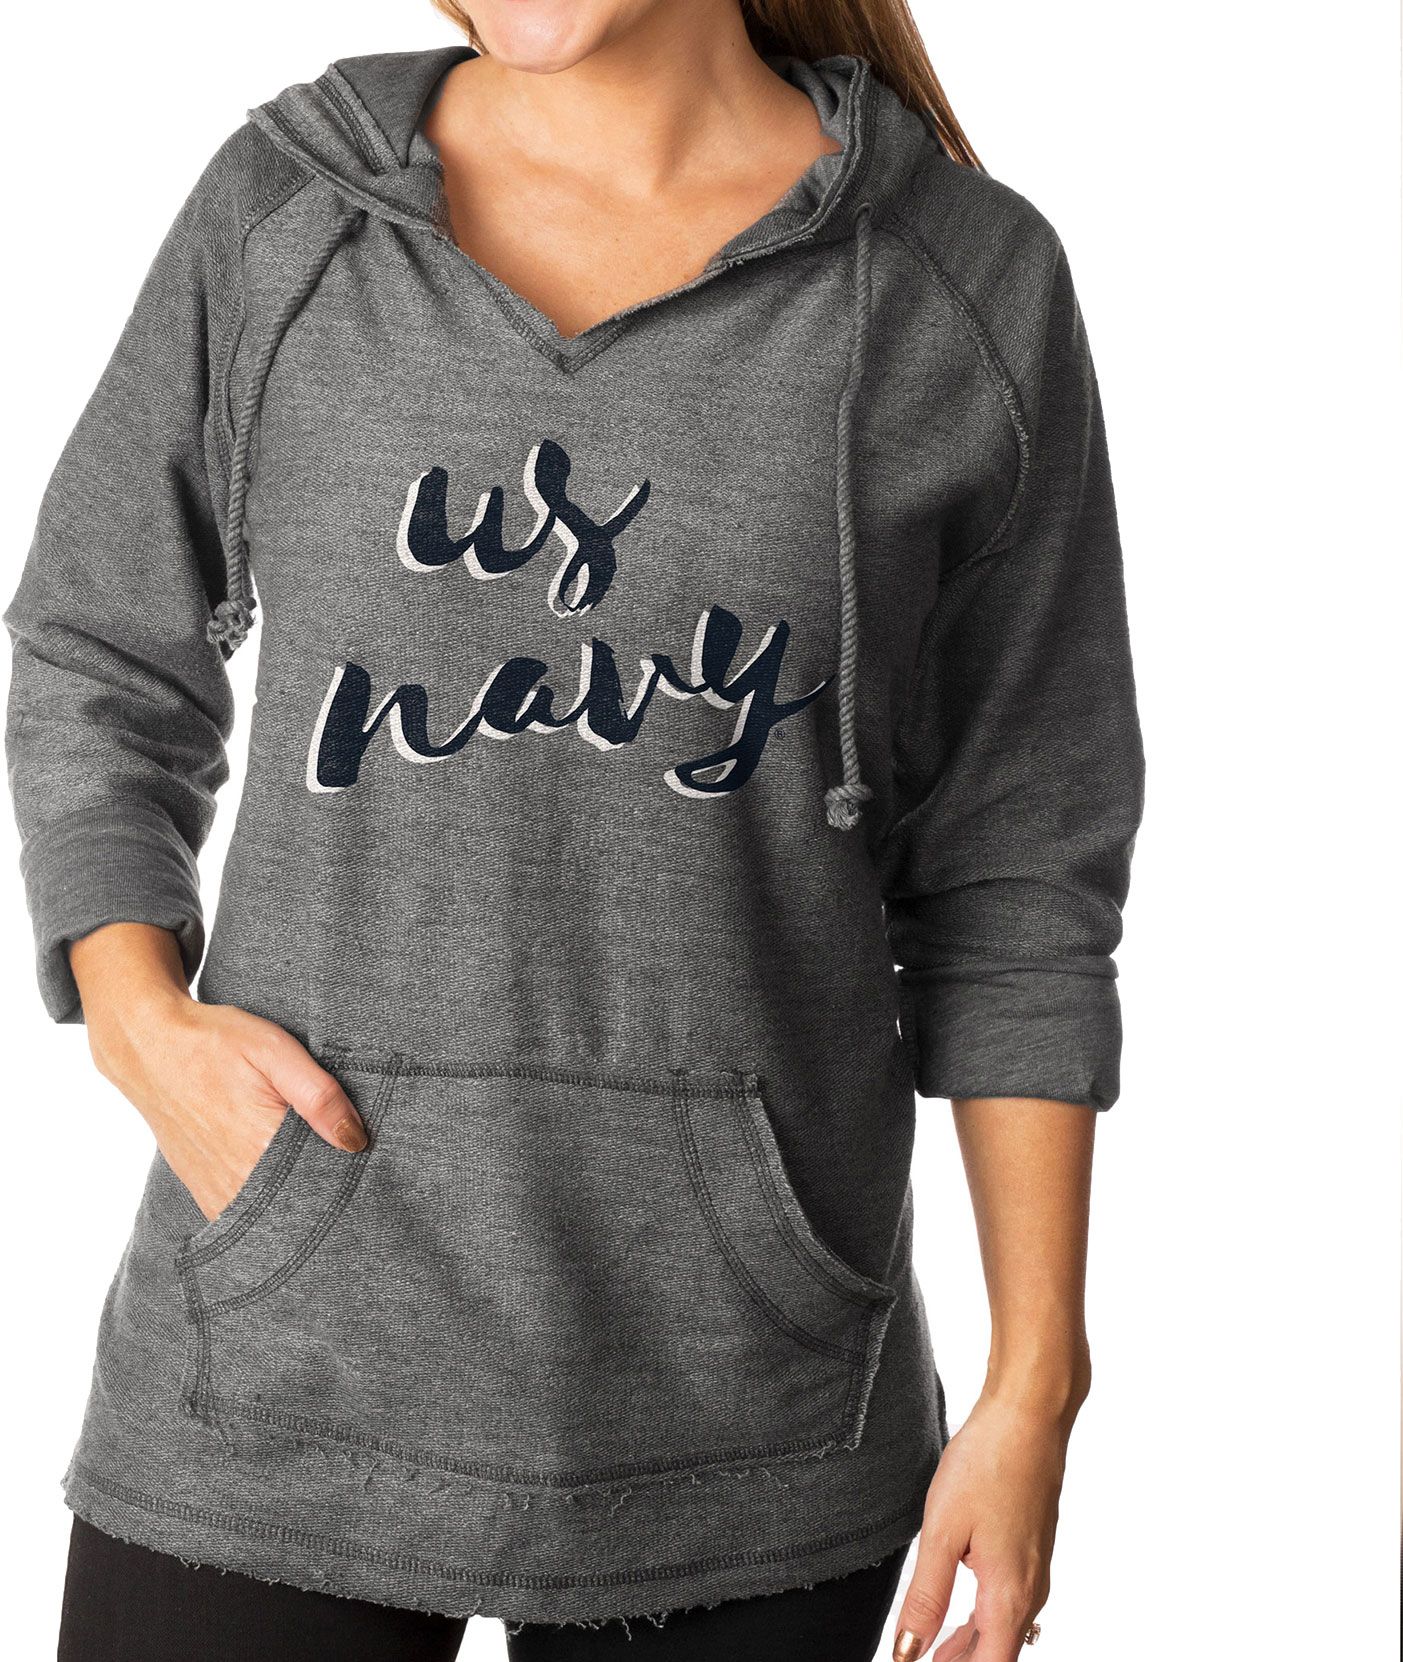 couture hoodie womens